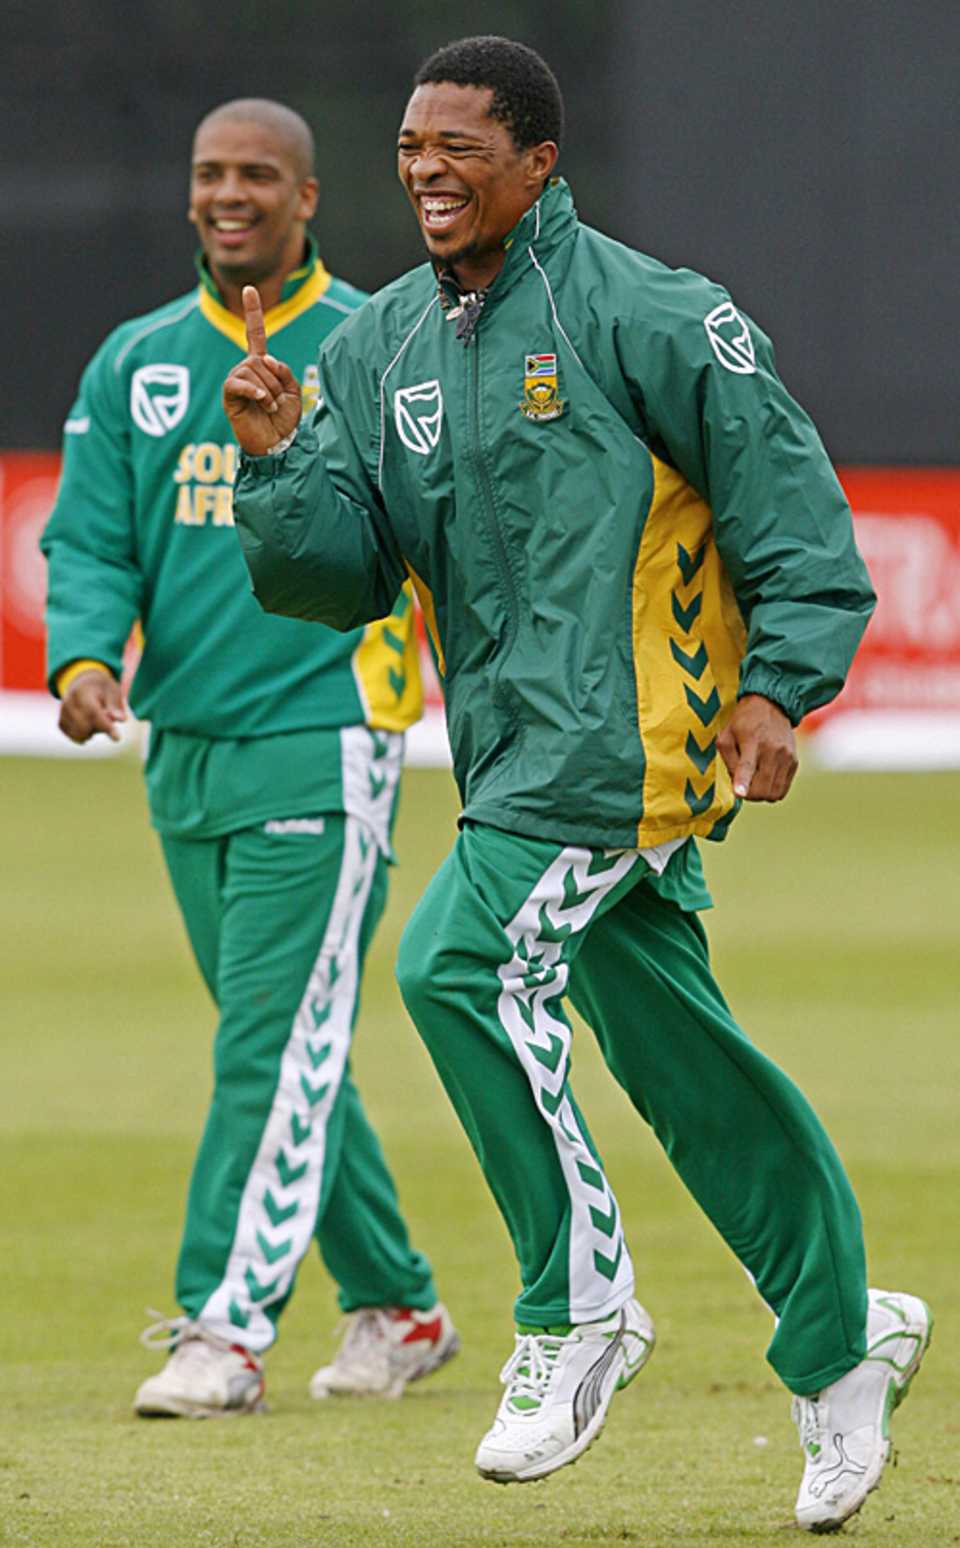 Makhaya Ntini larks about during a fielding session in Belfast